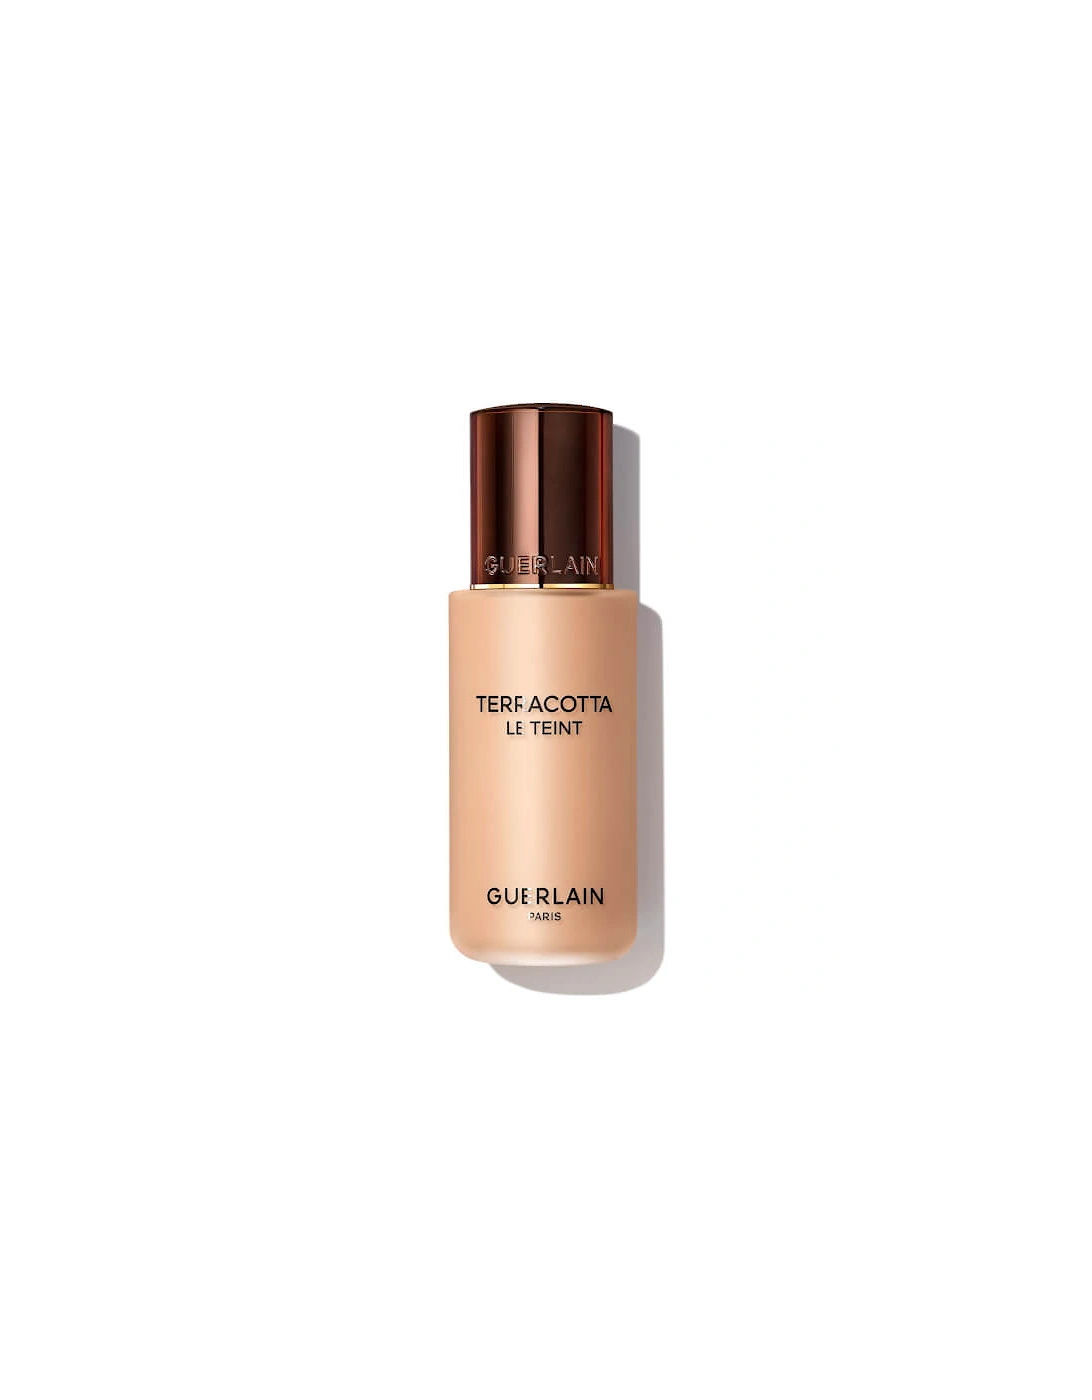 Terracotta Le Teint Healthy Glow Natural Perfection Foundation - 3.5N, 2 of 1